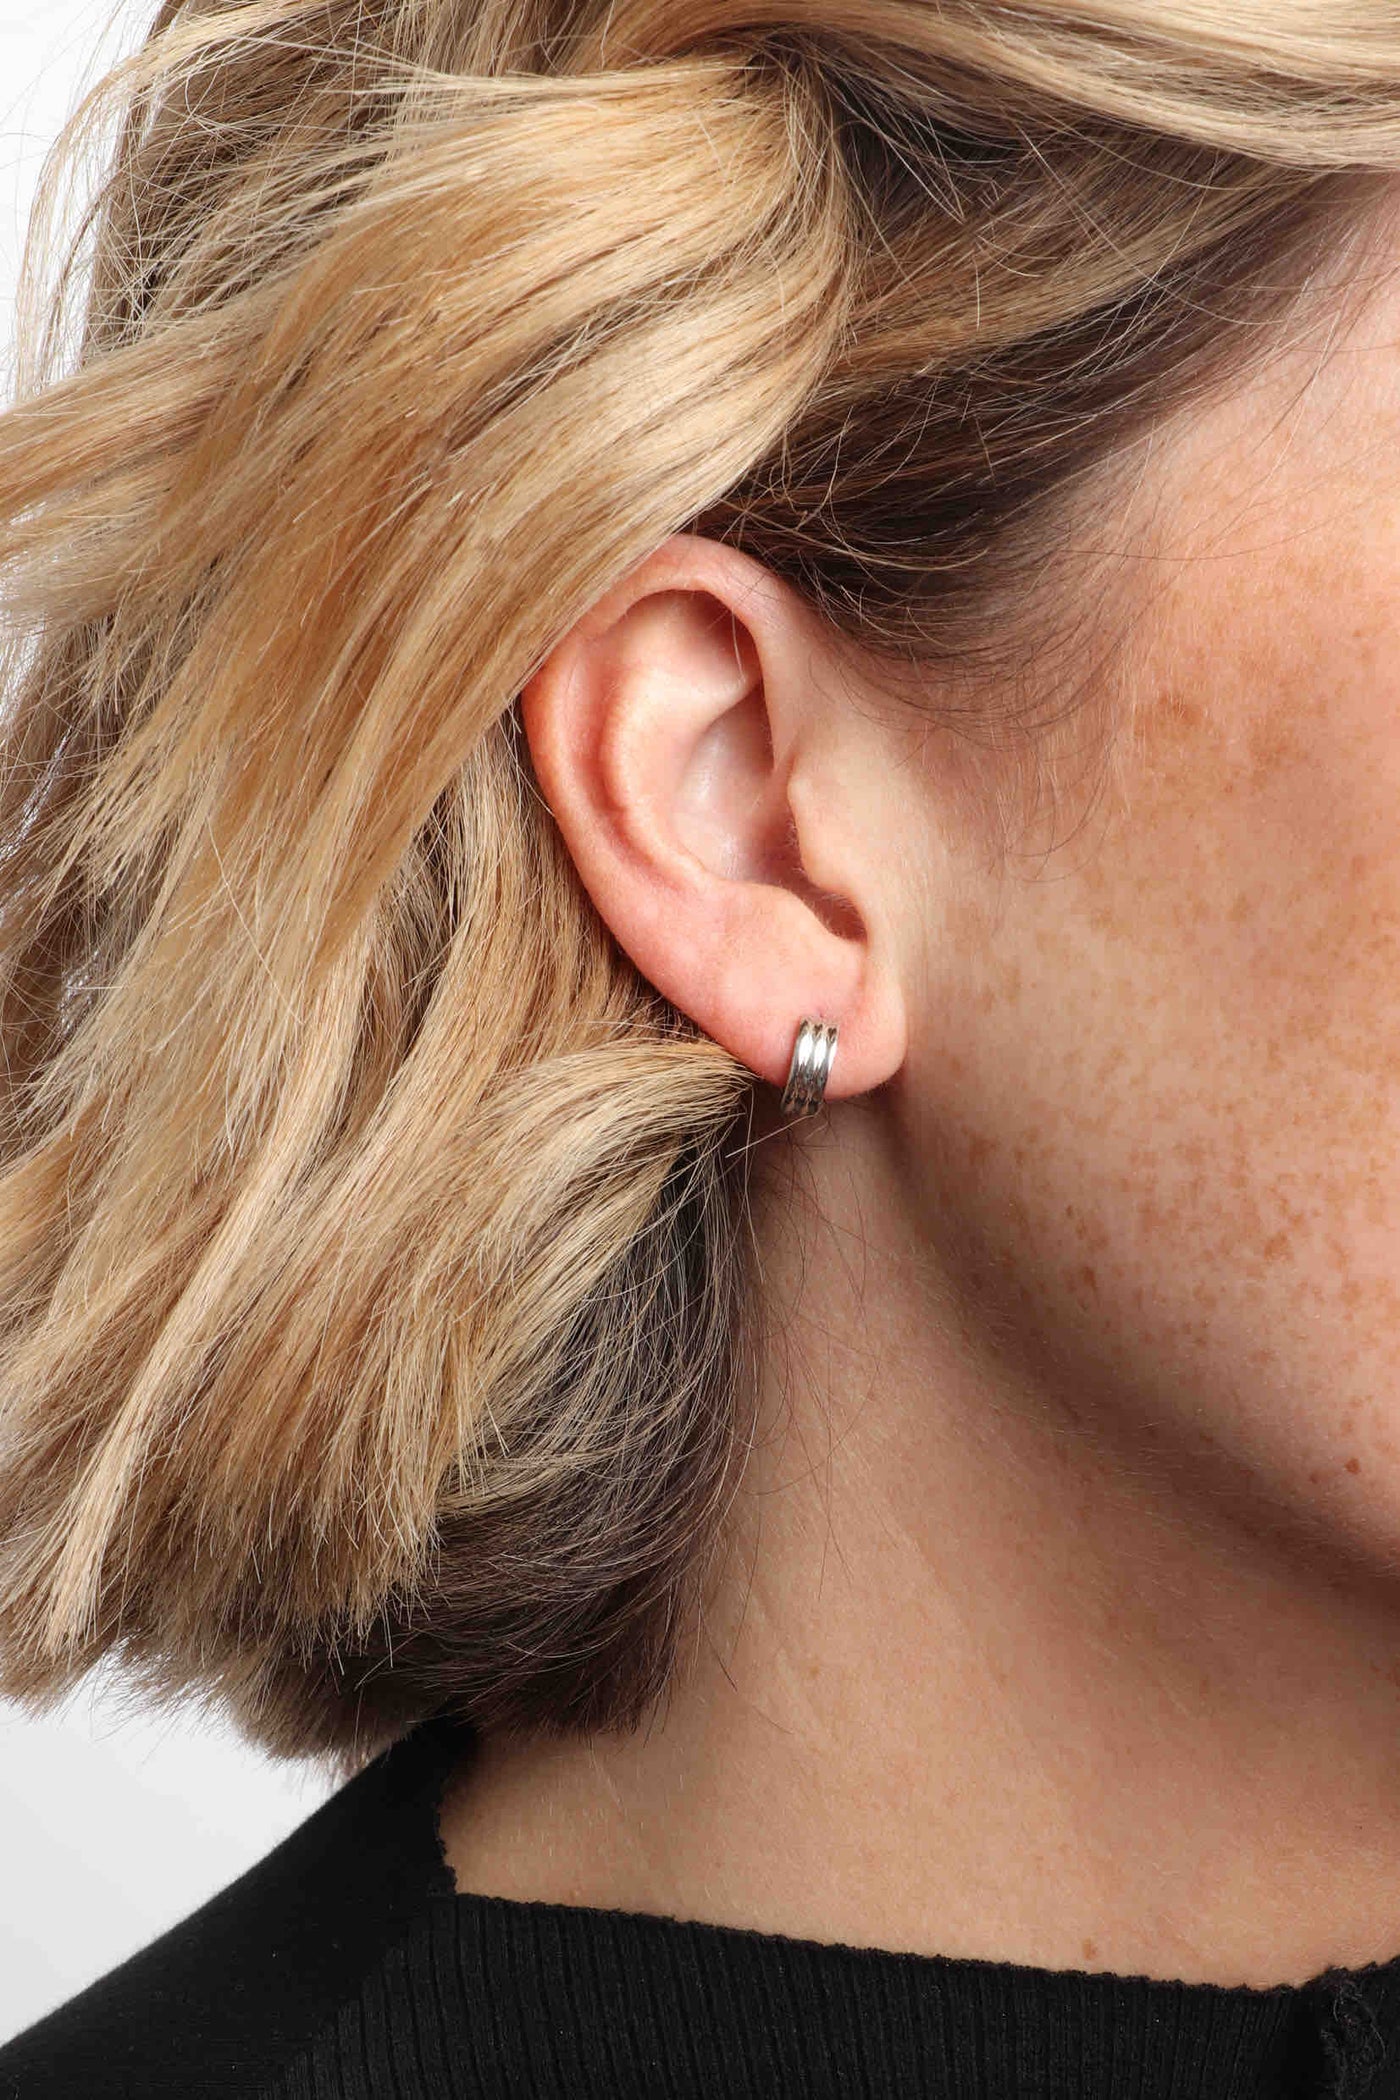 Marrin Costello wearing Marrin Costello Jewelry Evelyn 3mm Huggies ribbed small hoops with click tension hinge closure— for pierced ears. Waterproof, sustainable, hypoallergenic. Polished stainless steel.